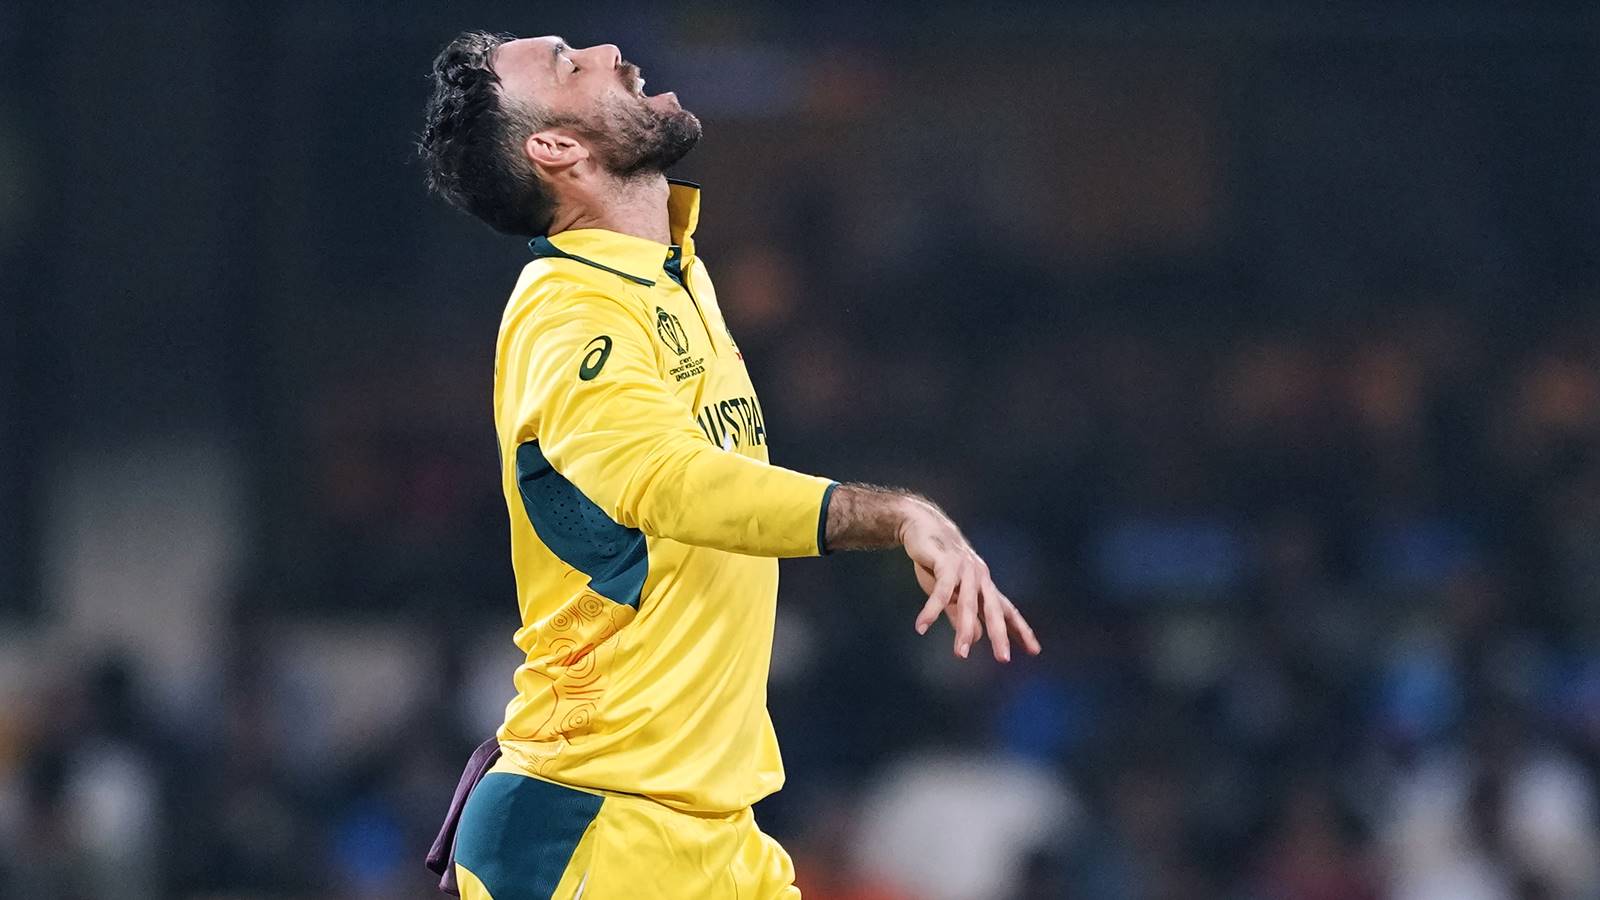 It gave me shocking headaches, dumbest idea': Glenn Maxwell slams light show  during ODI World Cup | Cricket-world-cup News - The Indian Express